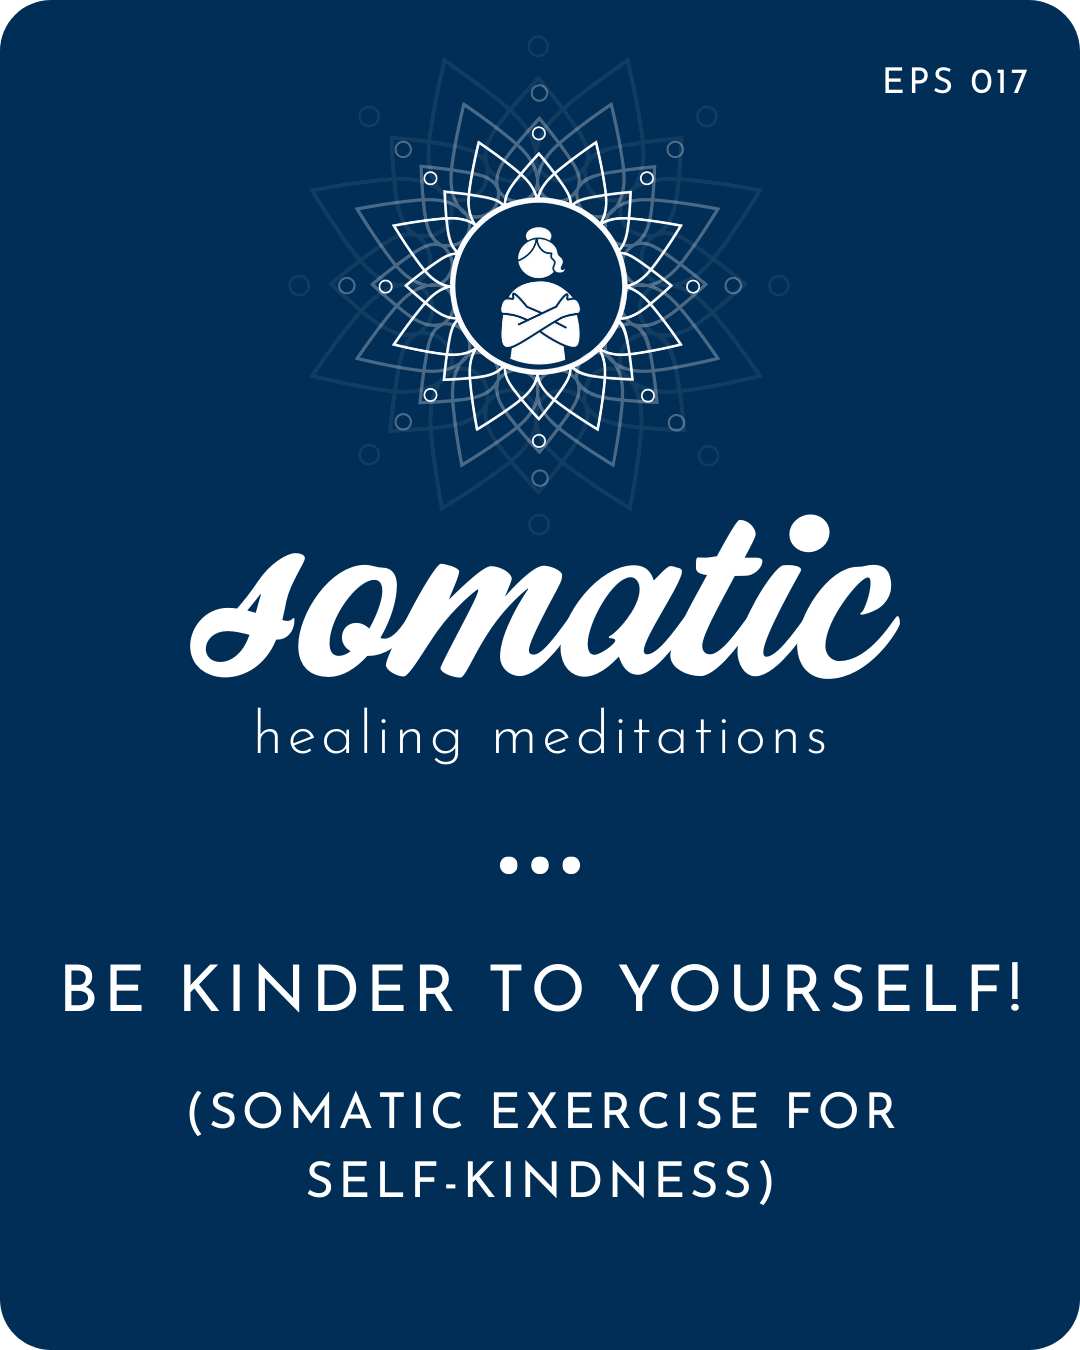 Be Kinder to Yourself! (Somatic Exercise for Self-Kindness)